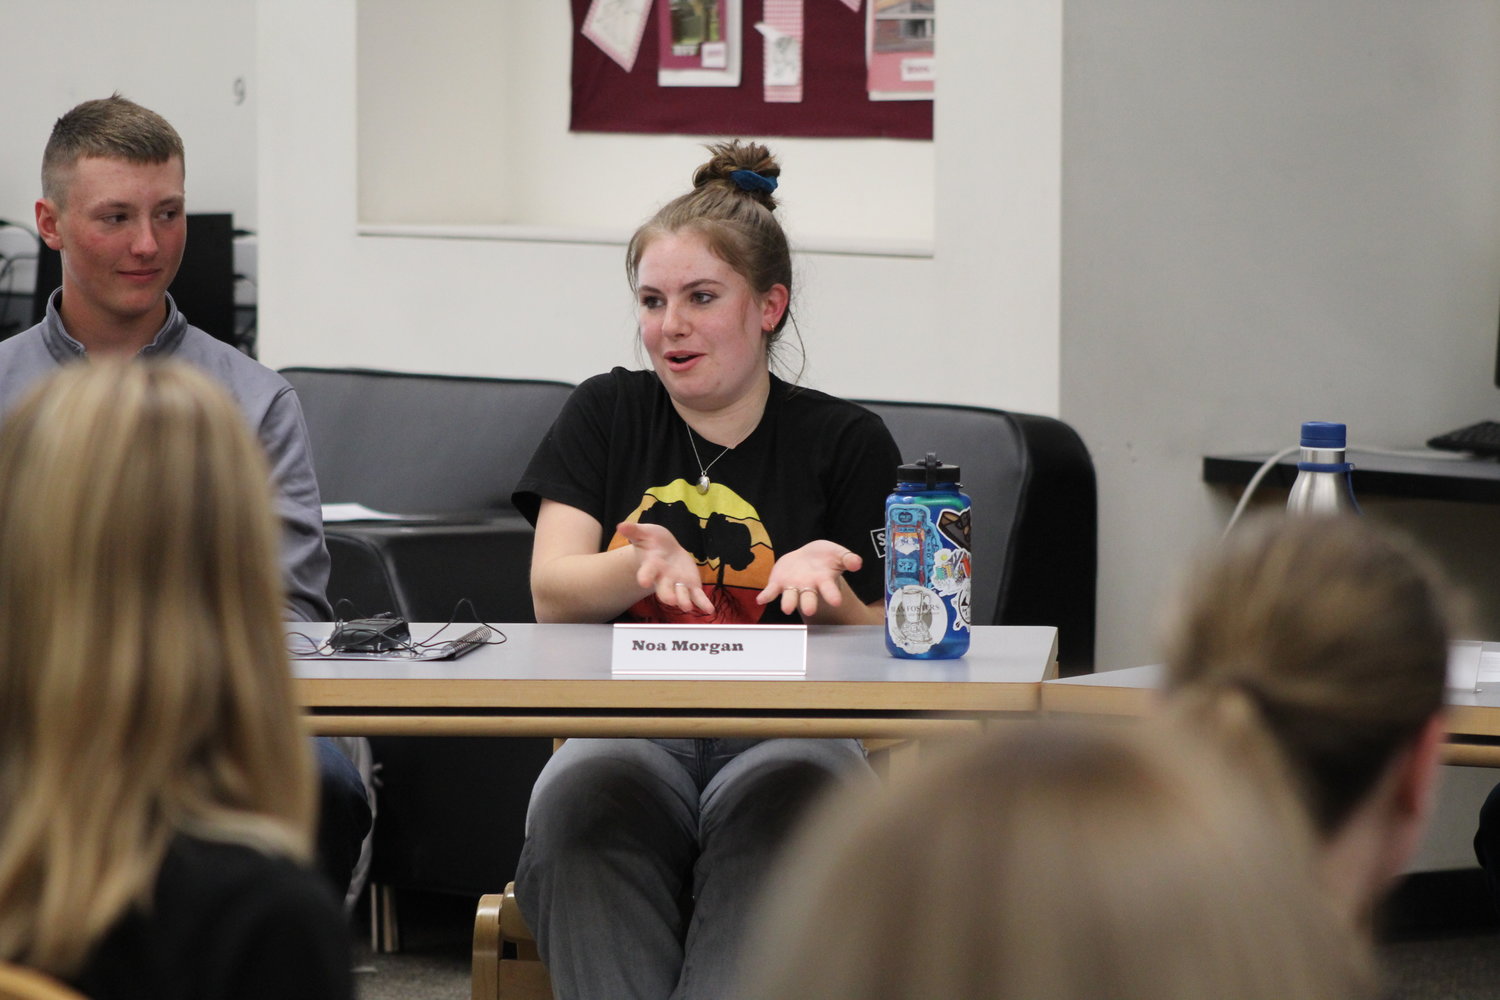 Golden High School freshman Noa Morgan discusses student mental health and the program Sources of Strength, which the school implemented in 2011, during a roundtable with the Colorado Attorney General's Office May 24 at GHS.